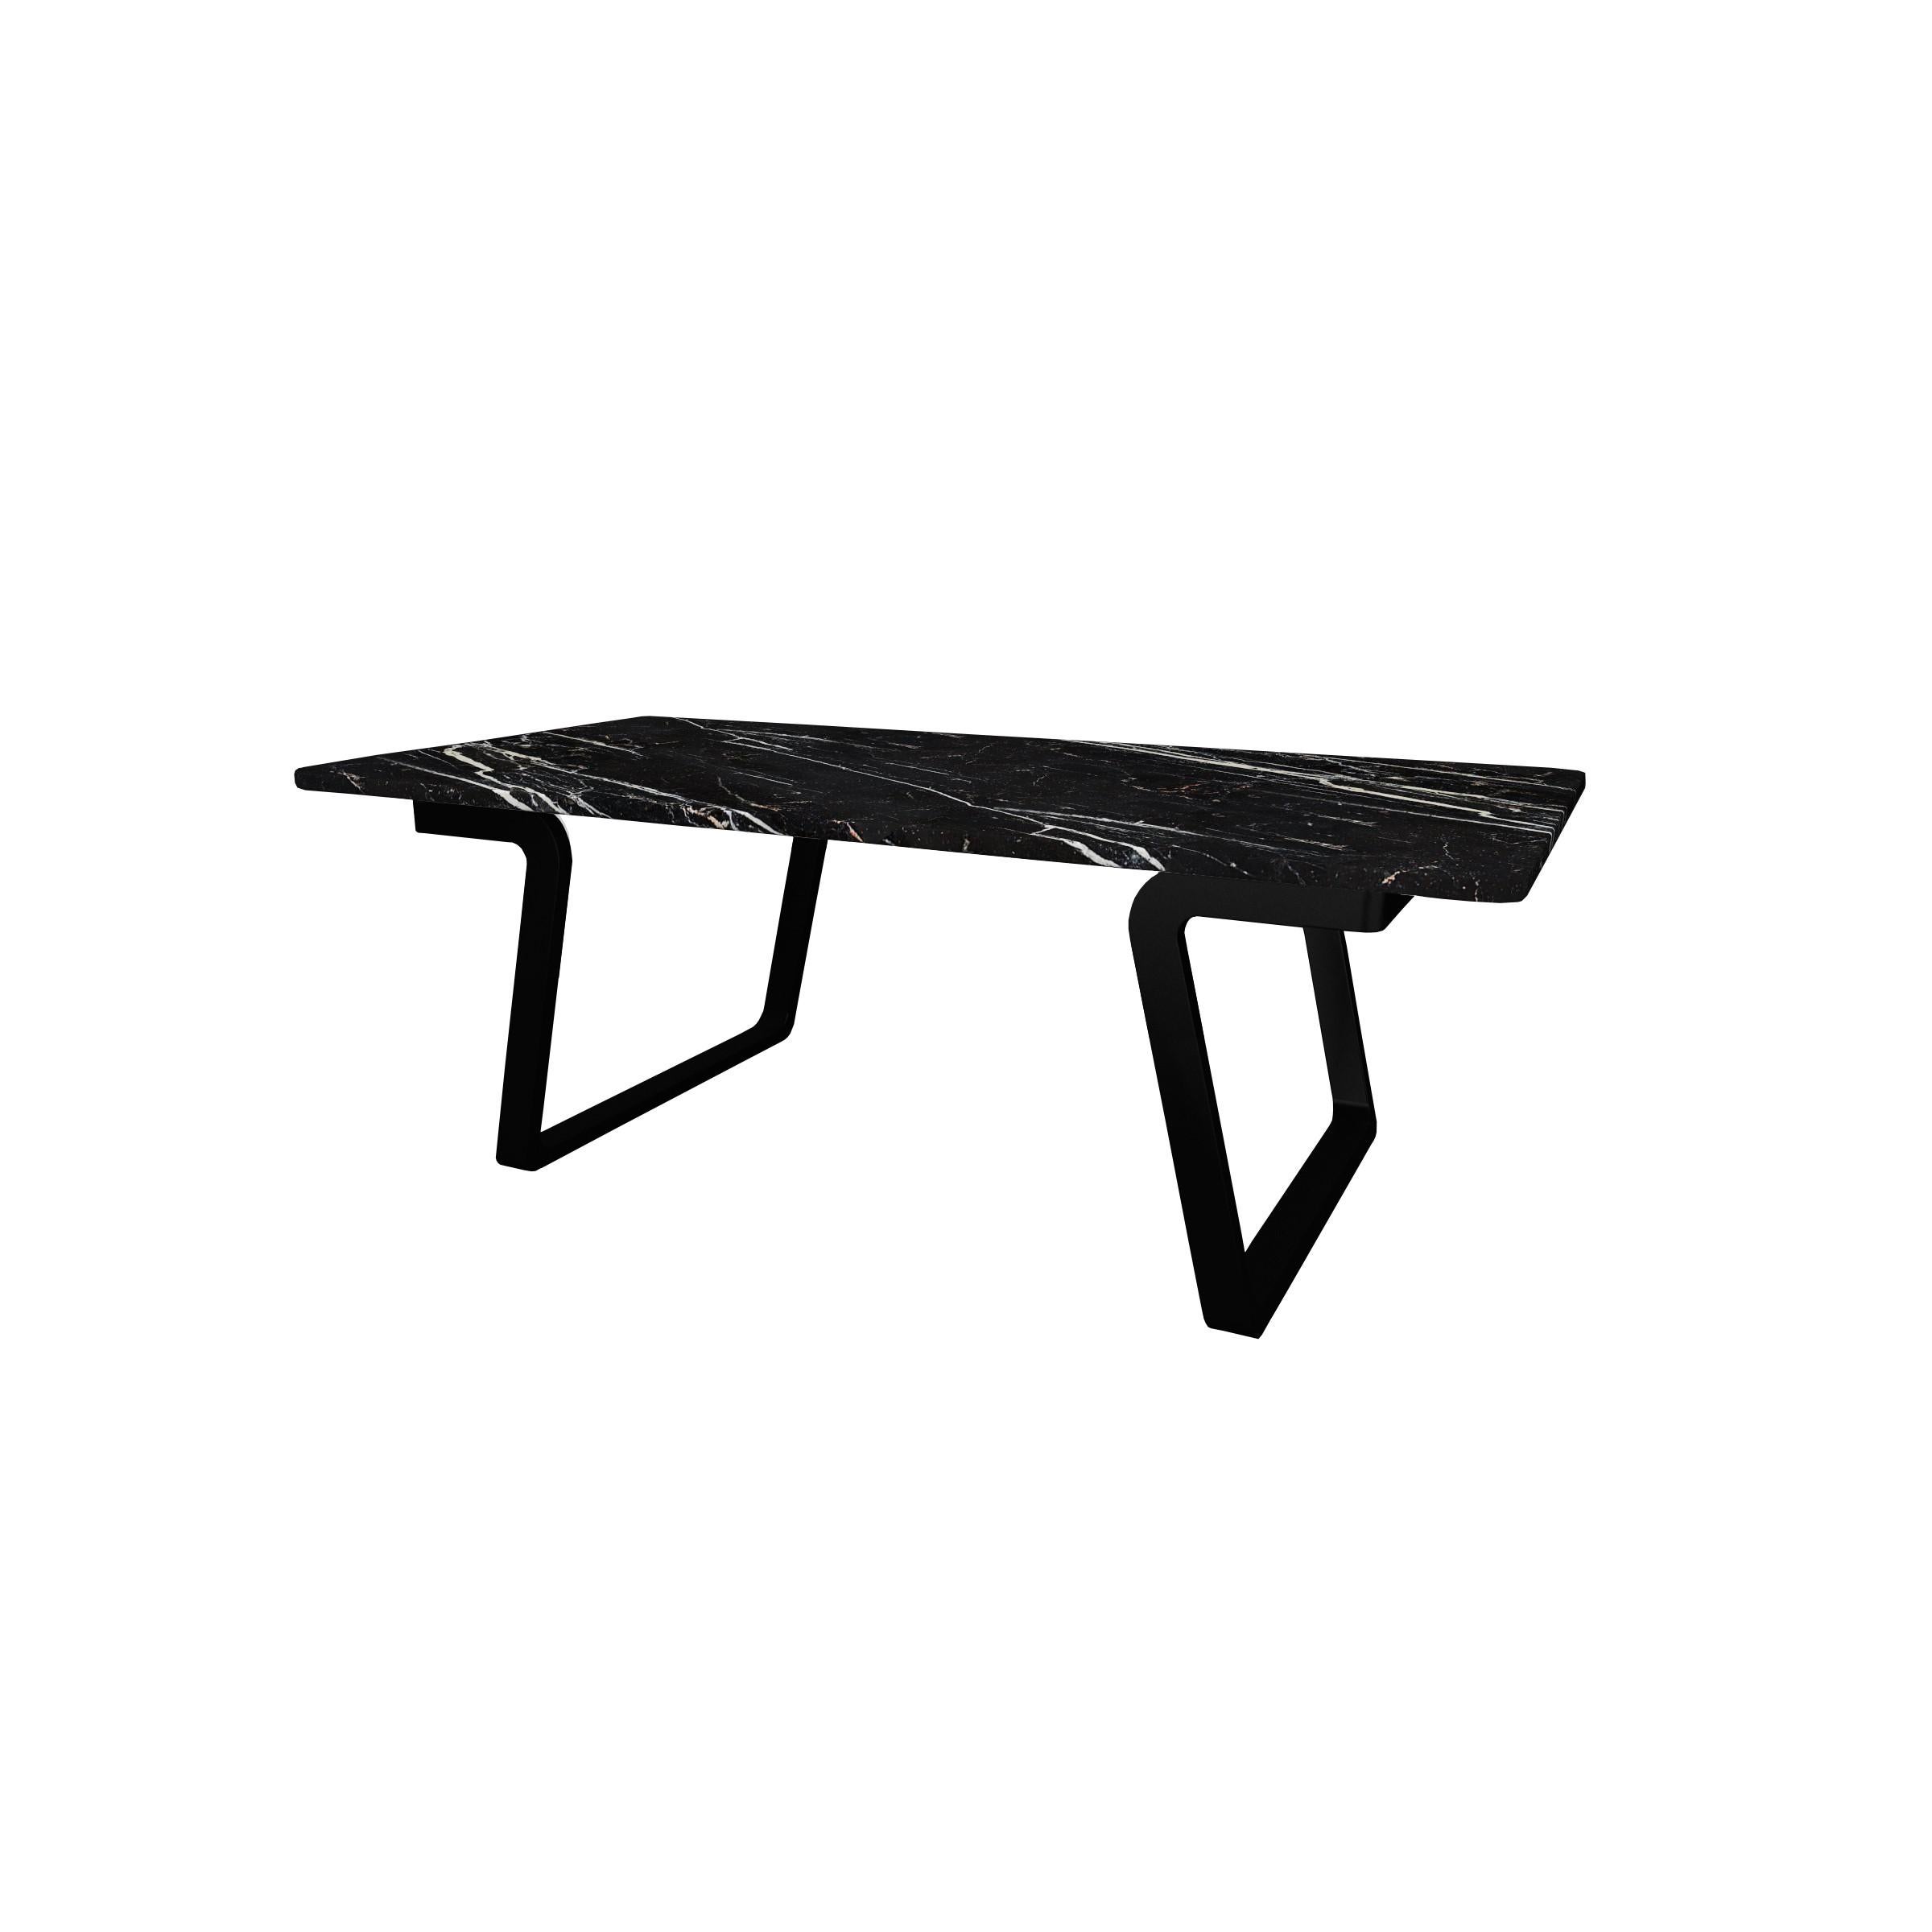 𝗣𝗿𝗼𝗱𝘂𝗰𝘁 𝗗𝗲𝘁𝗮𝗶𝗹𝘀:
NORDST JERRY Coffee Table from Italian Green Lightning Marble, Danish Modern Design, New

Skilled work in the creation of this collection characterised by the bending technic of the frame instead of the regular